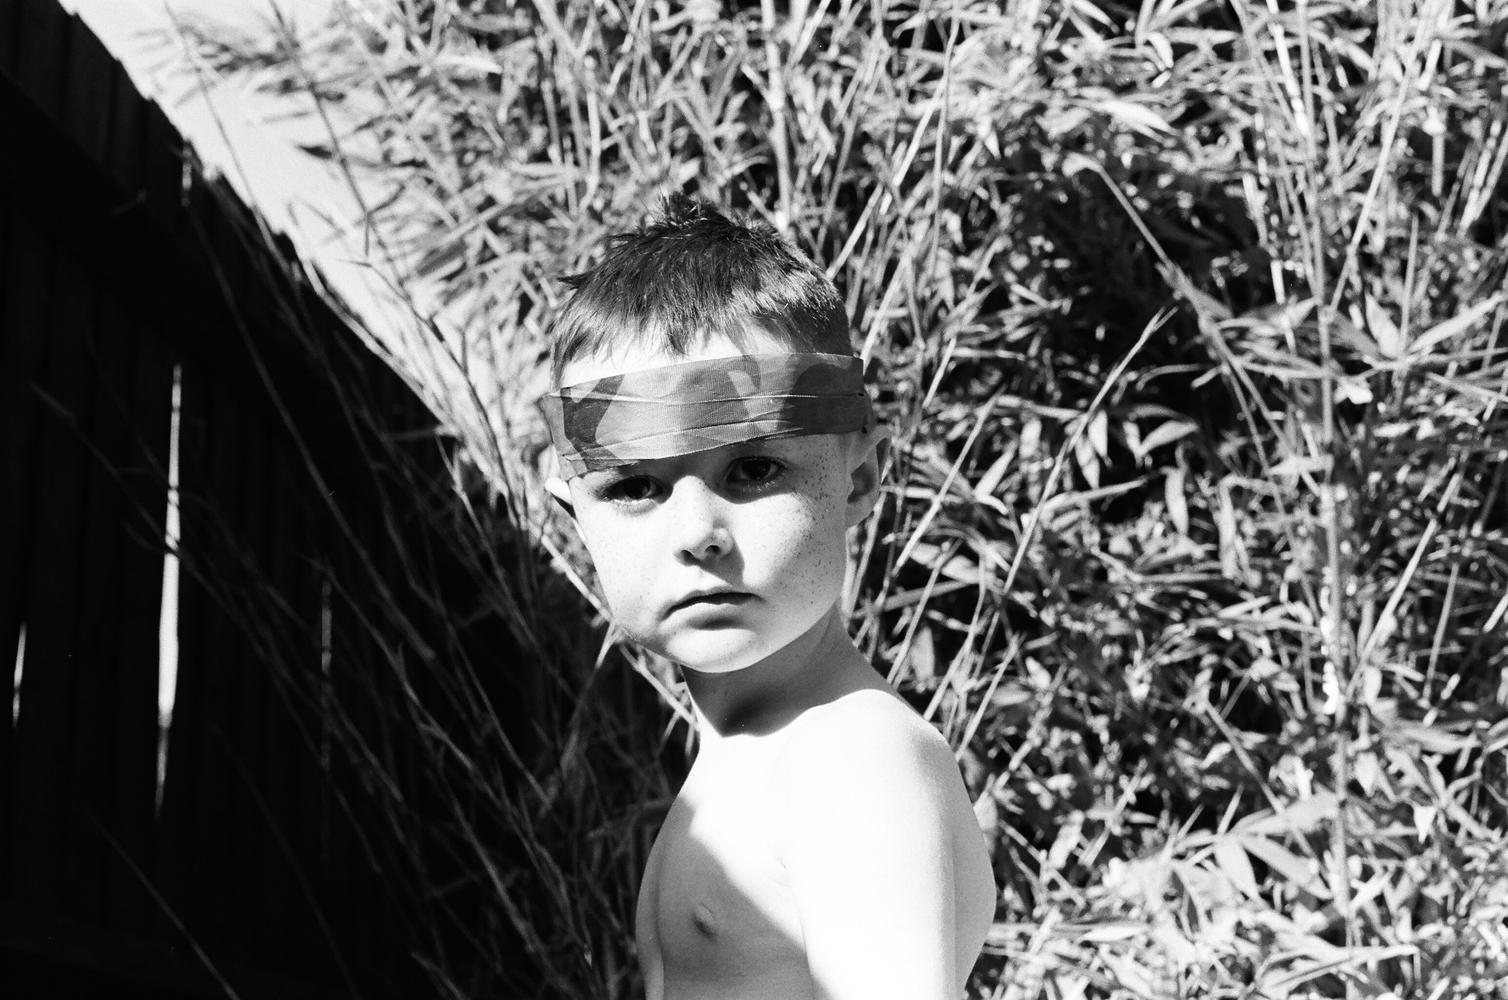 A black and white film photograph of a young boy in the garden